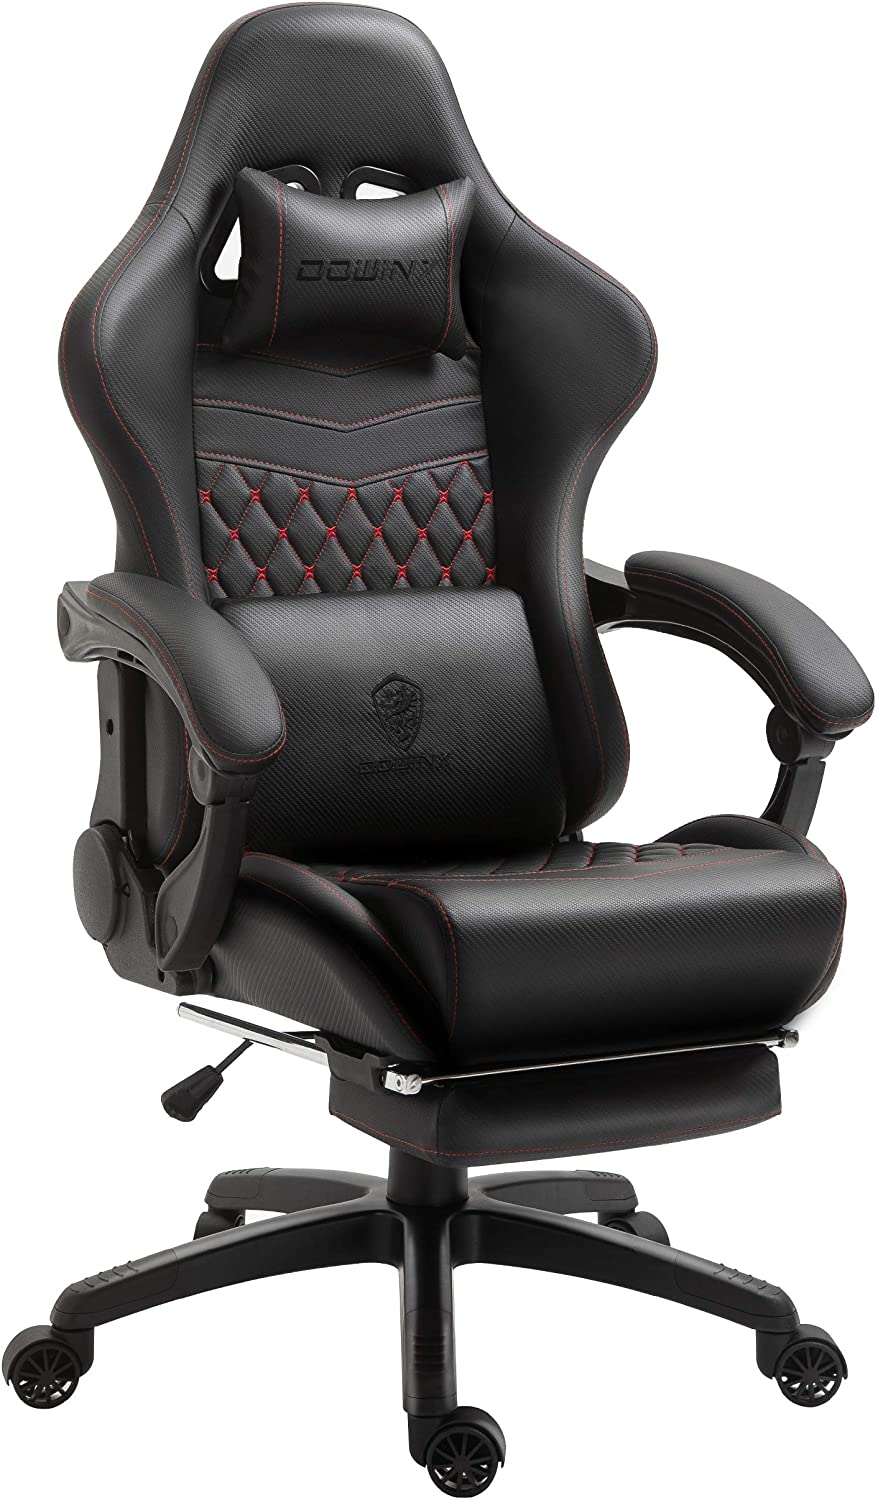 Dowinx Gaming Chair Review Does it Live Up to the Hype